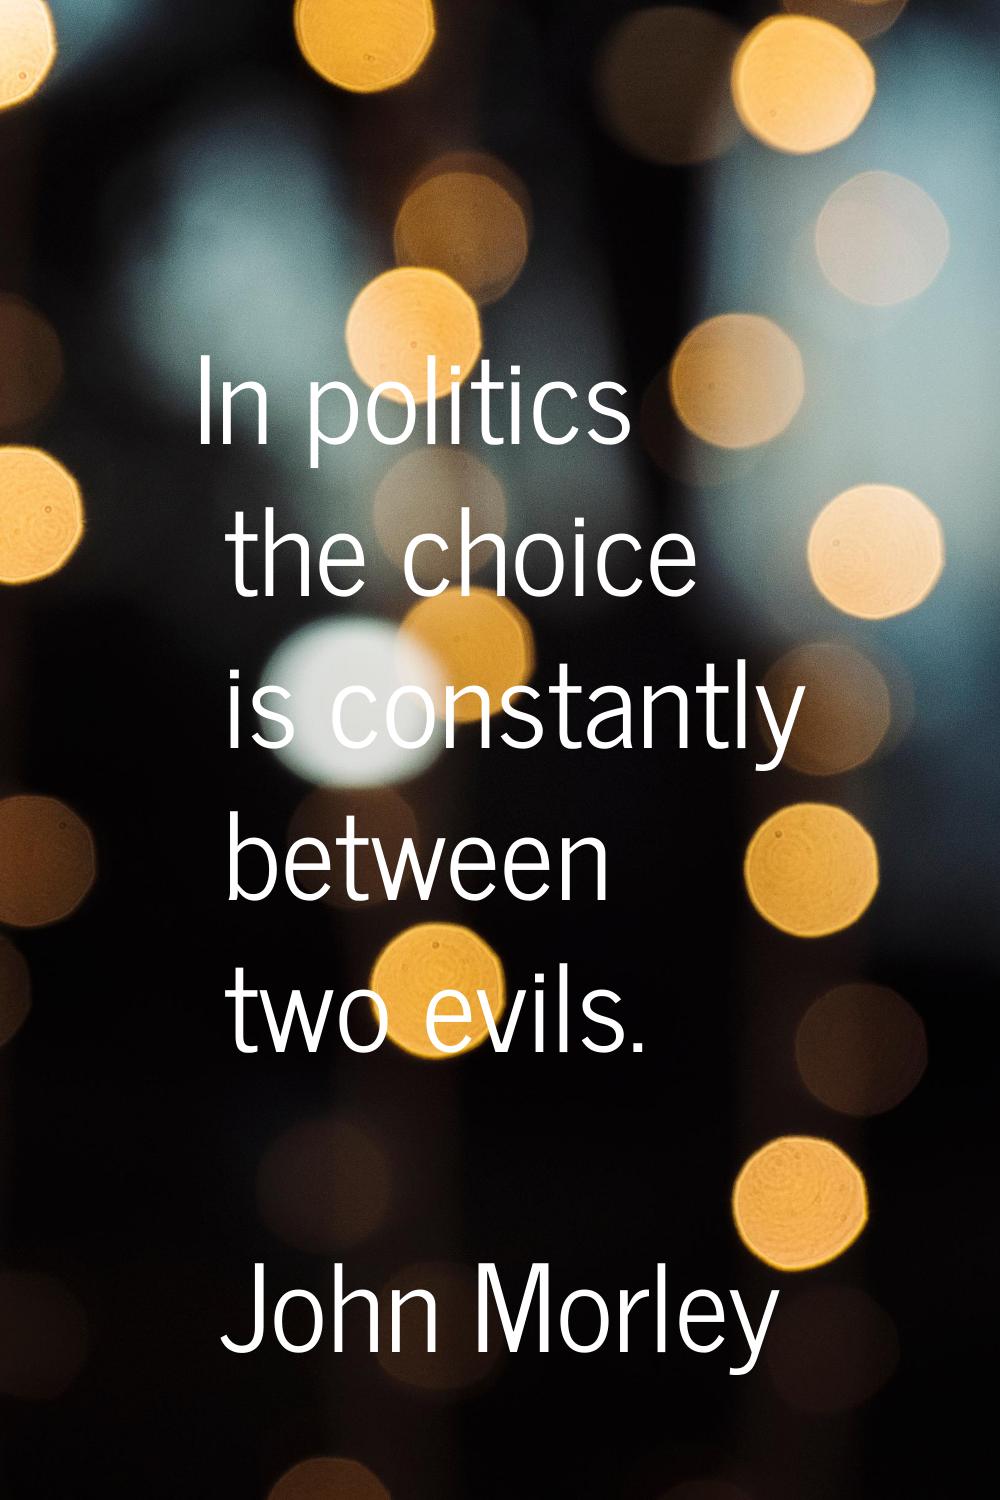 In politics the choice is constantly between two evils.